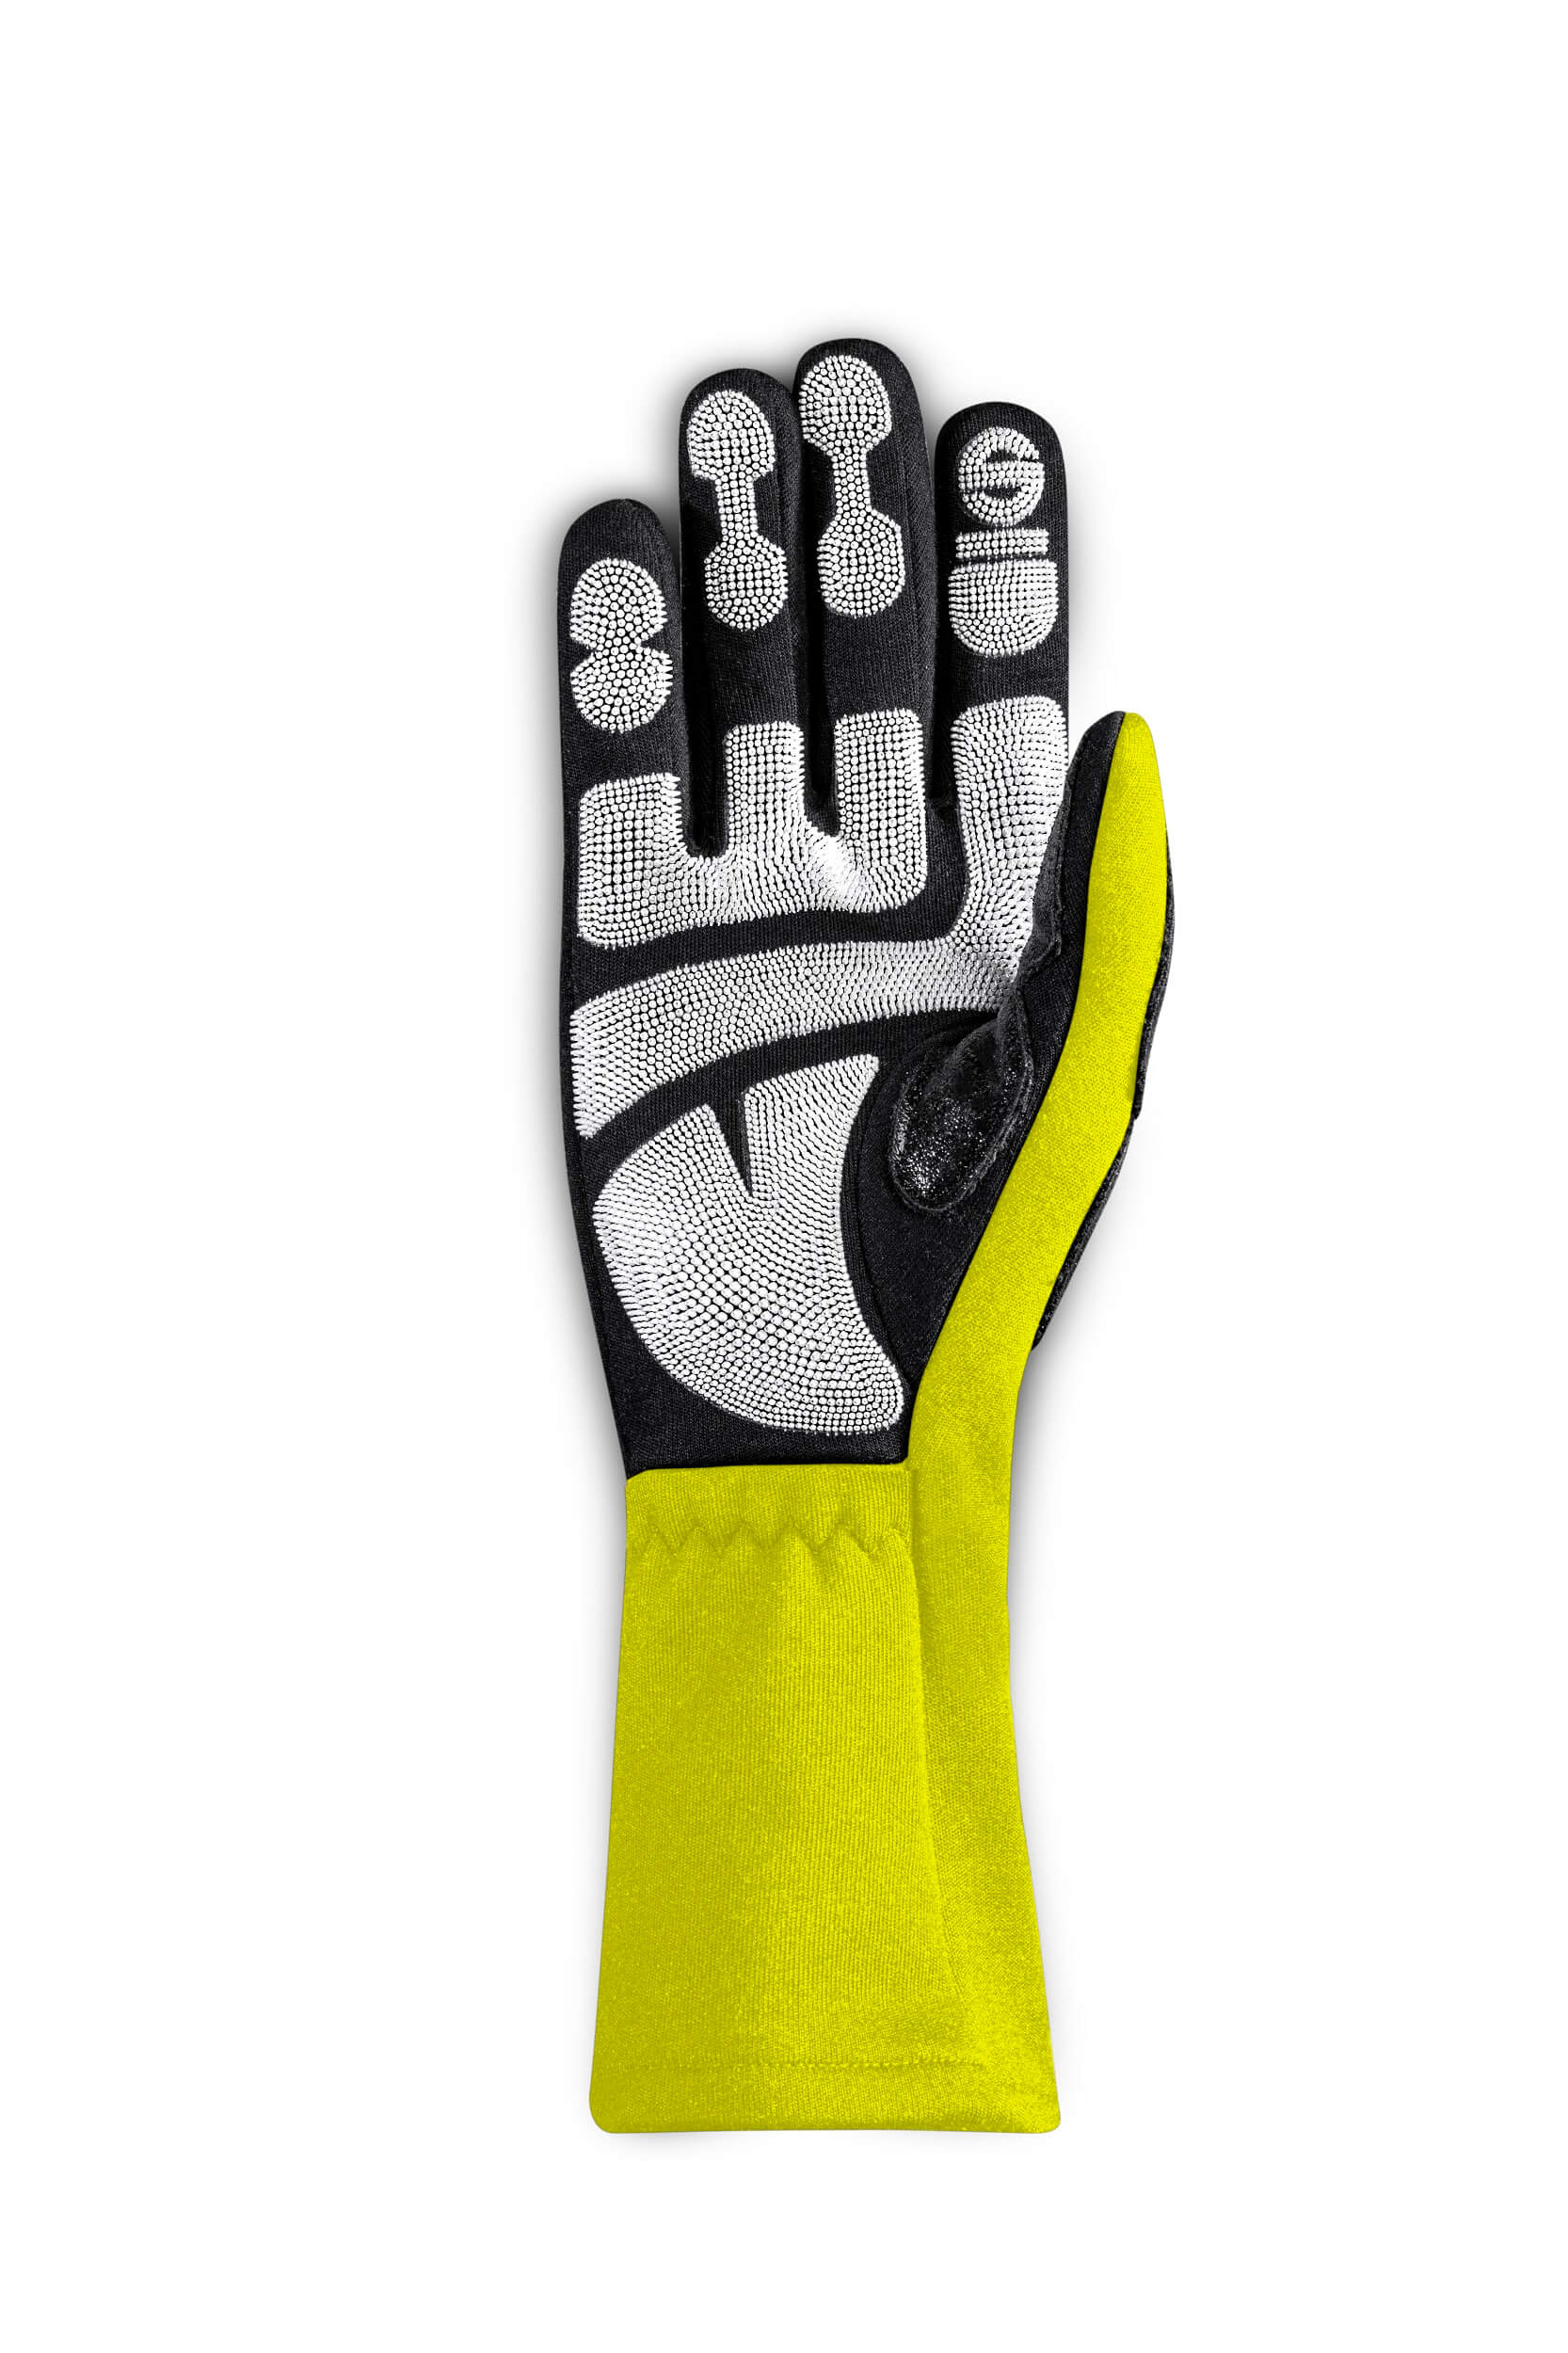 SPARCO 00131808GF TIDE MECA Gloves, NOT FIA, yellow, size 8 Photo-1 